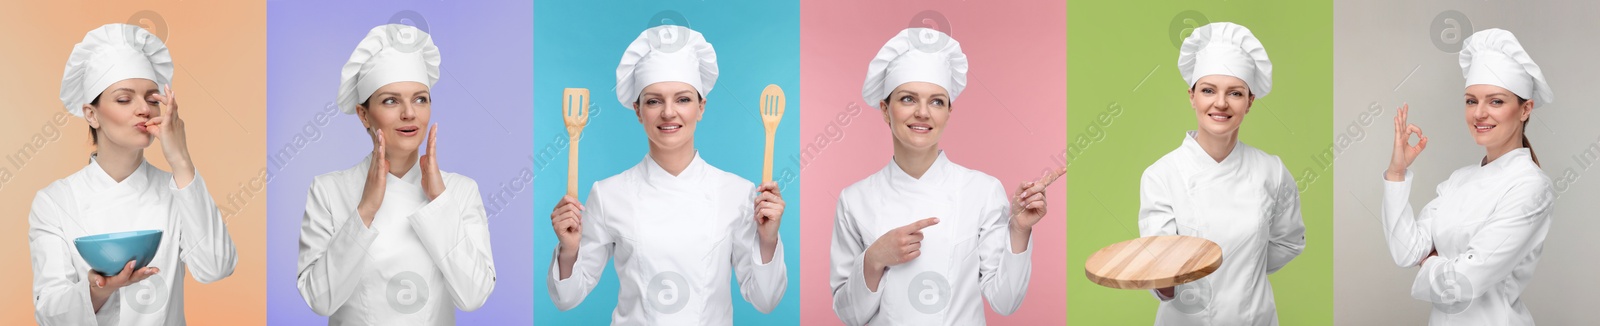 Image of Collage with photos of professional chef on different color backgrounds